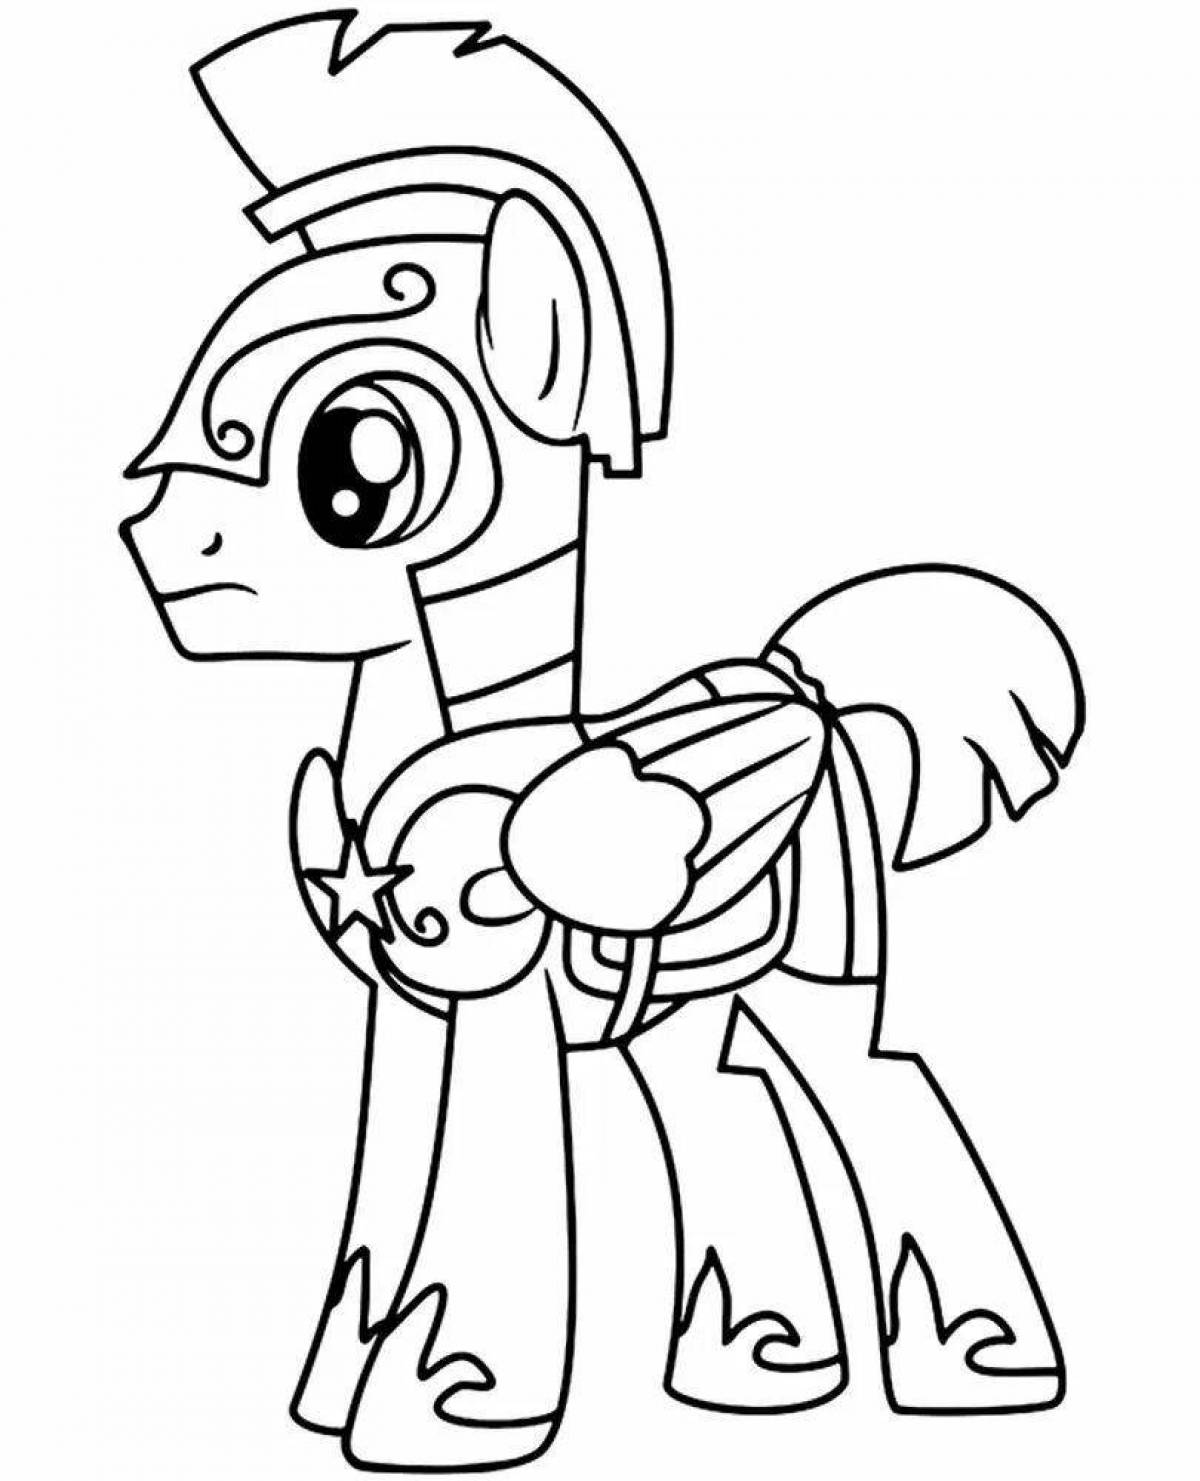 Coloring page sparkling pip pony